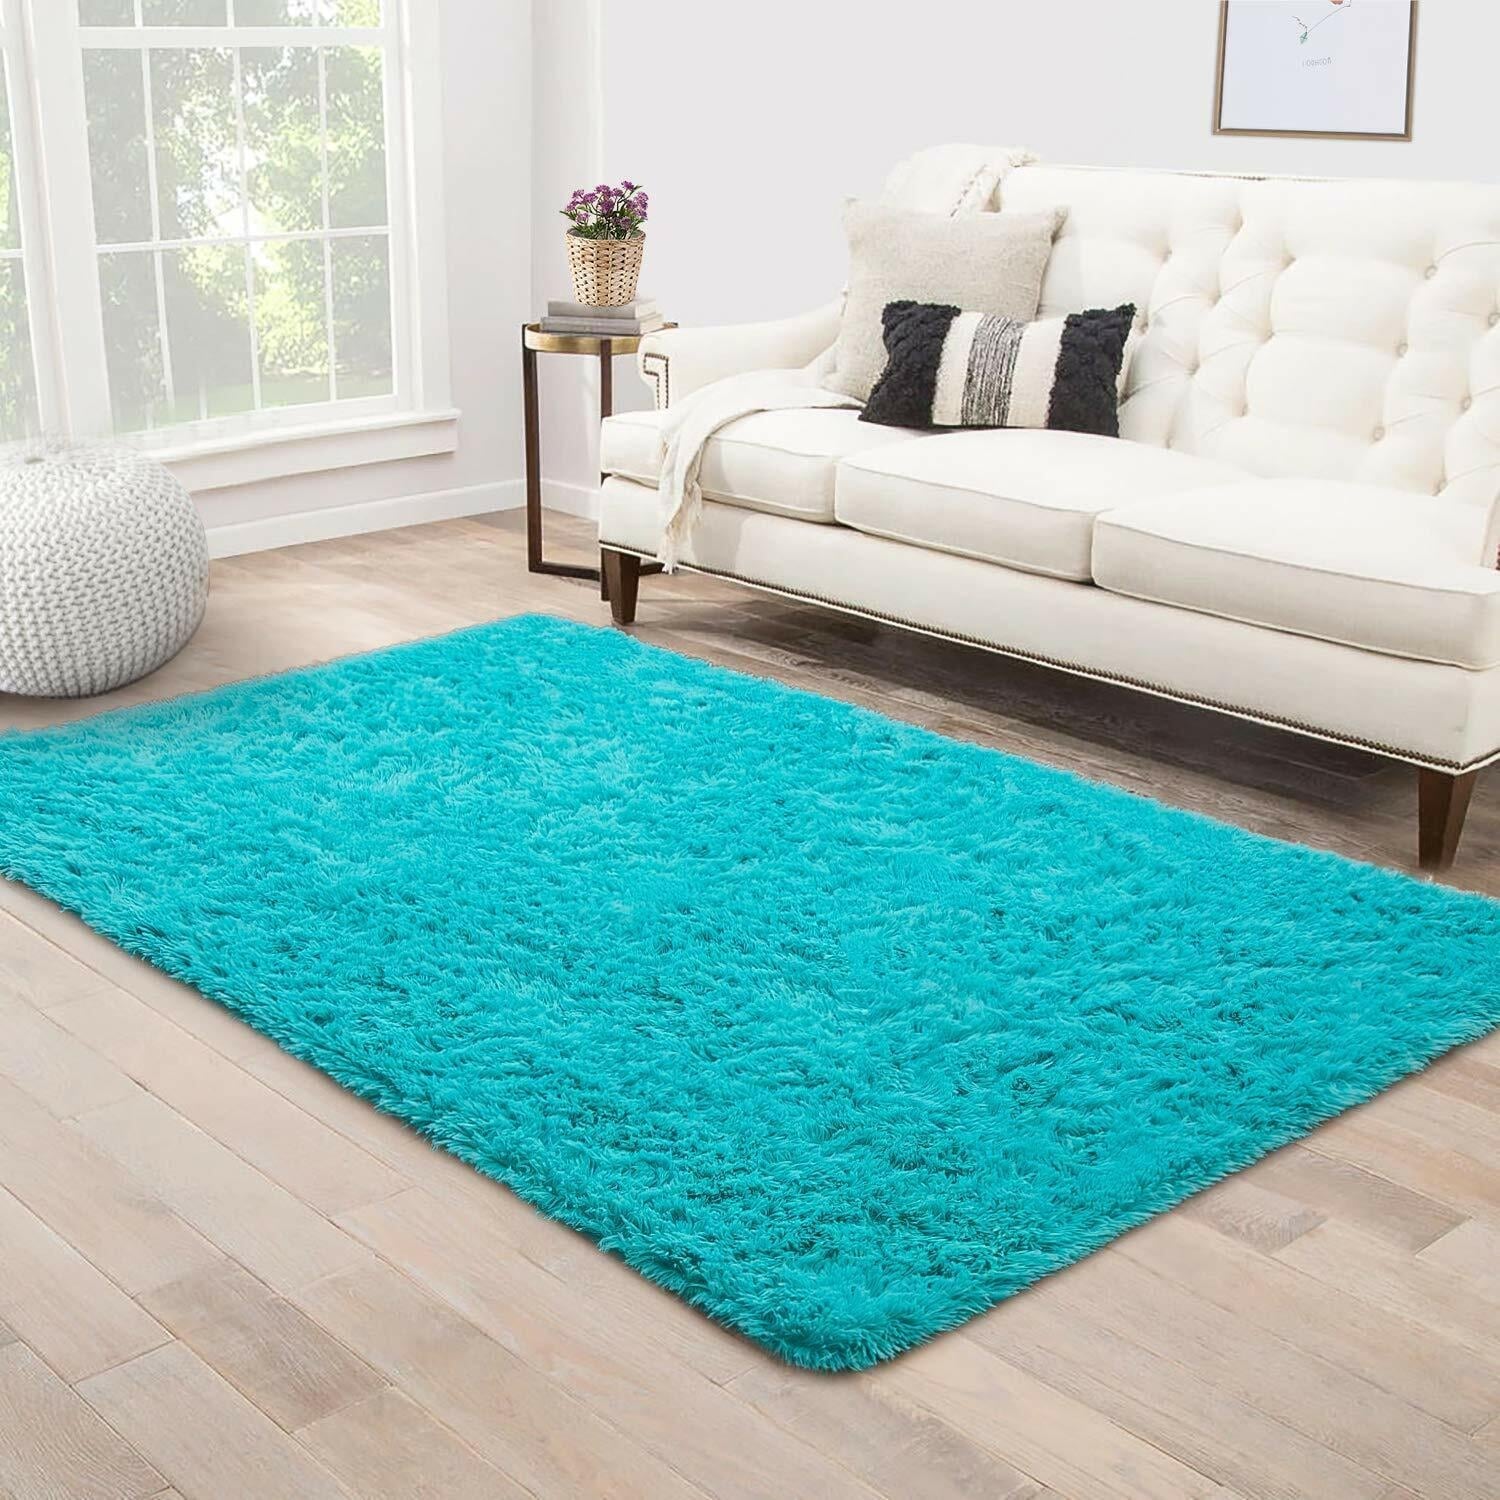 Ultra Soft Fluffy Rug Indoor Area Carpet  47 X 31 In  Blue - 31x47